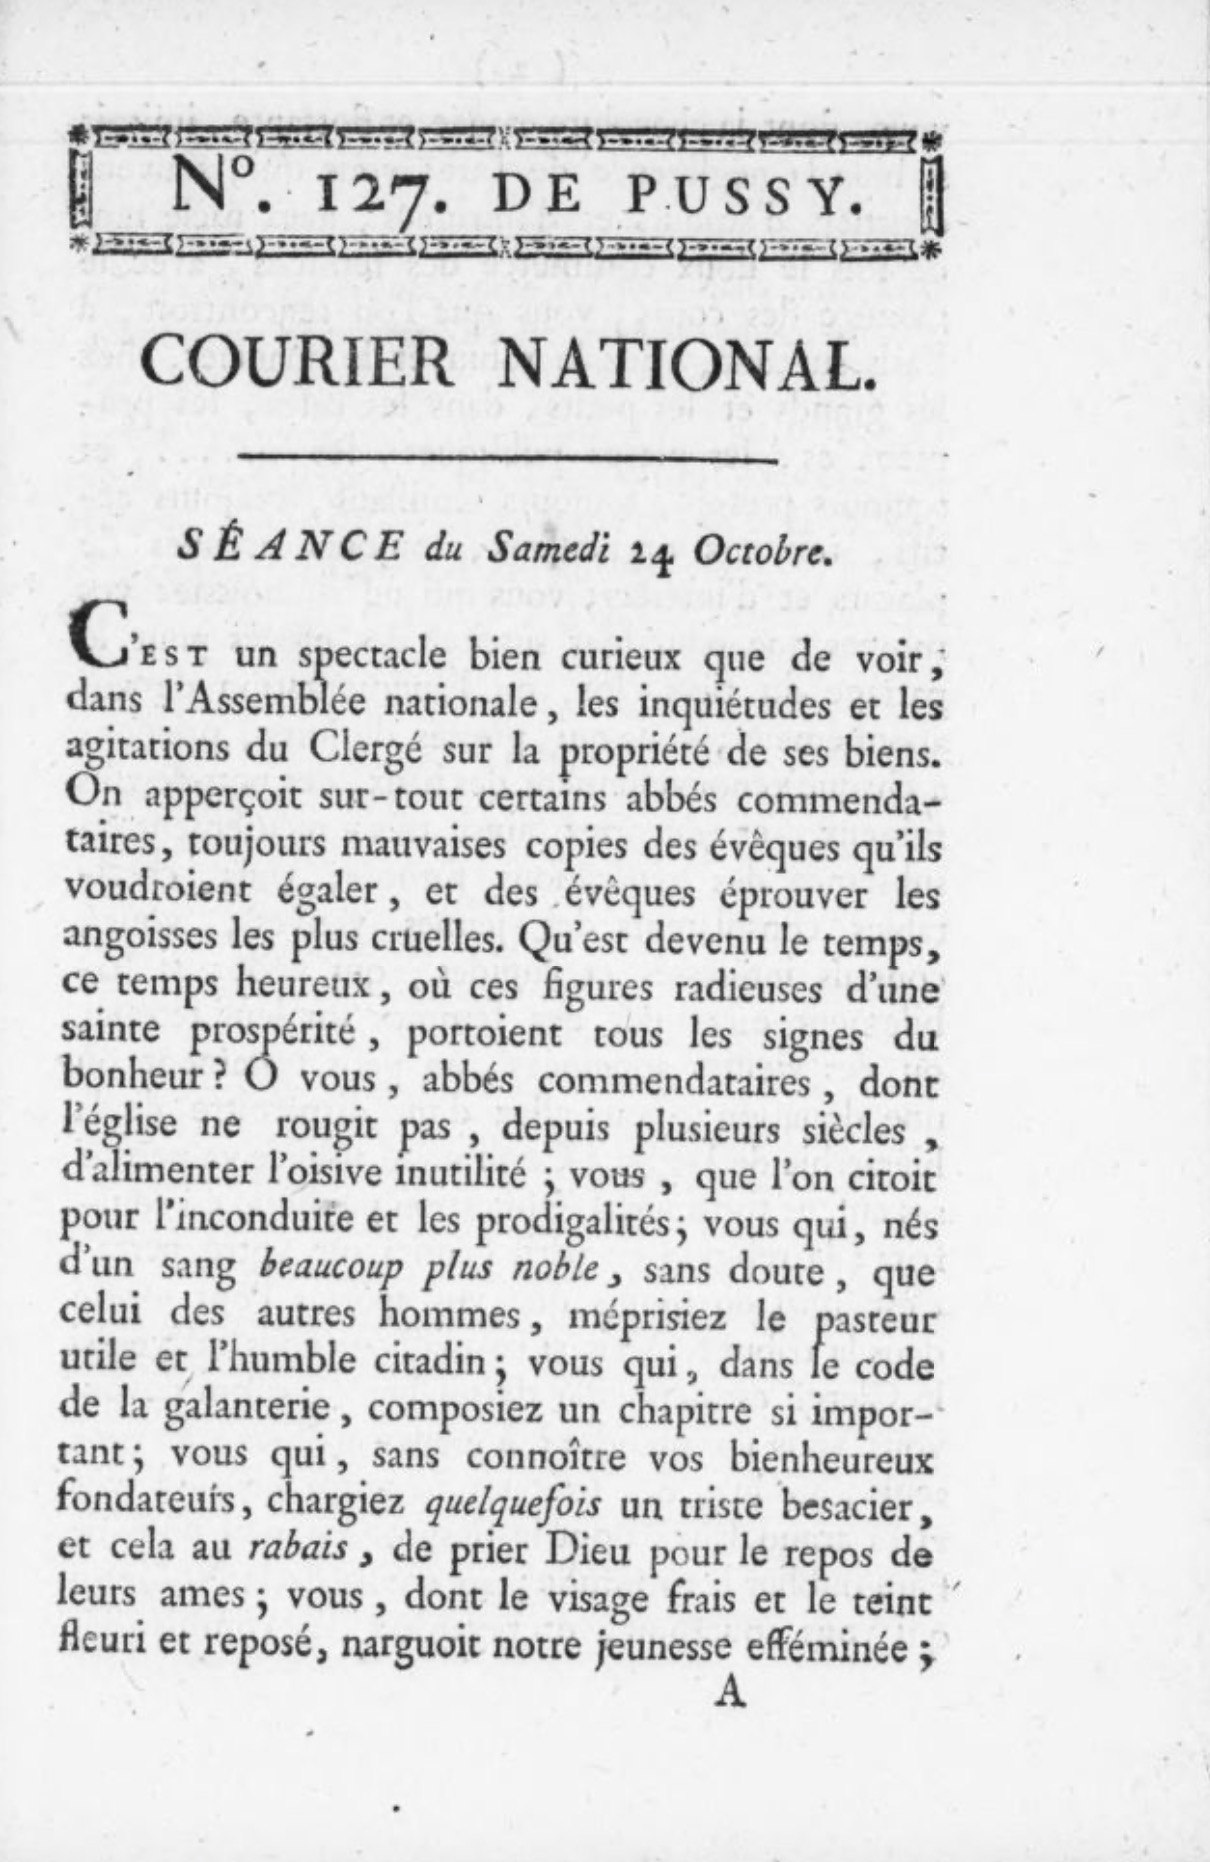 Courier national (1789)